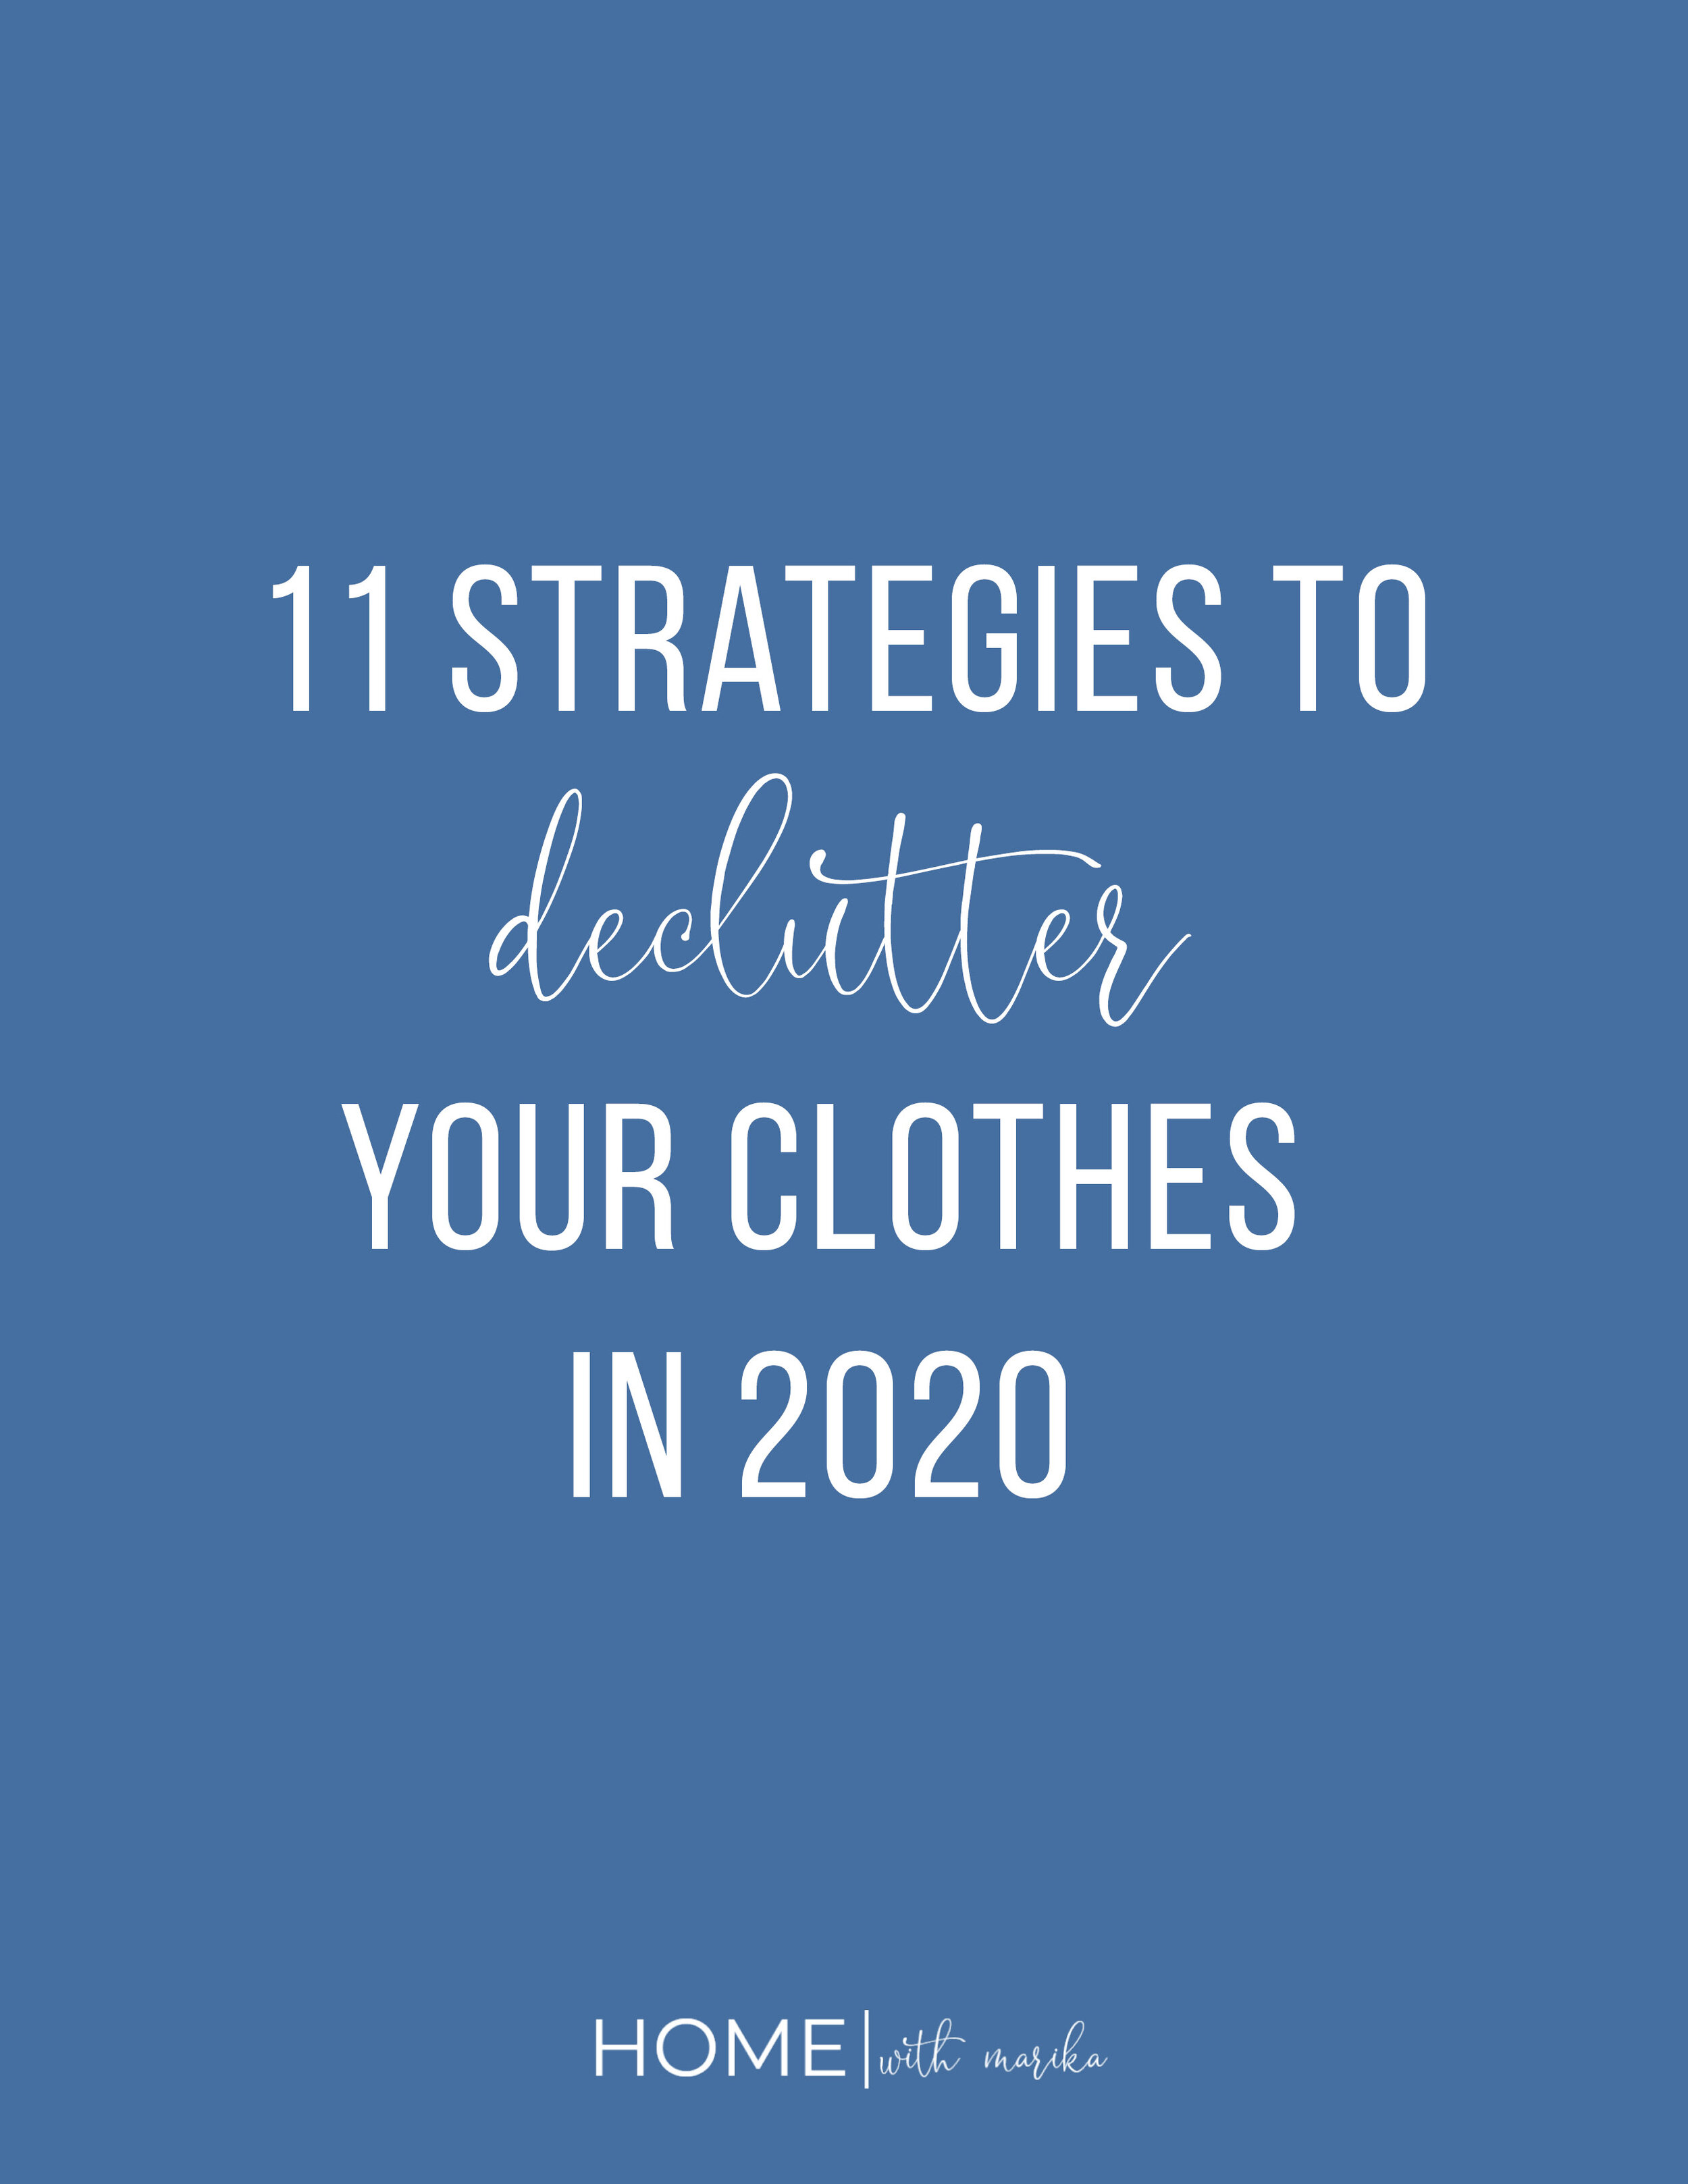 11 Strategies to Declutter Your Clothes in 2020 